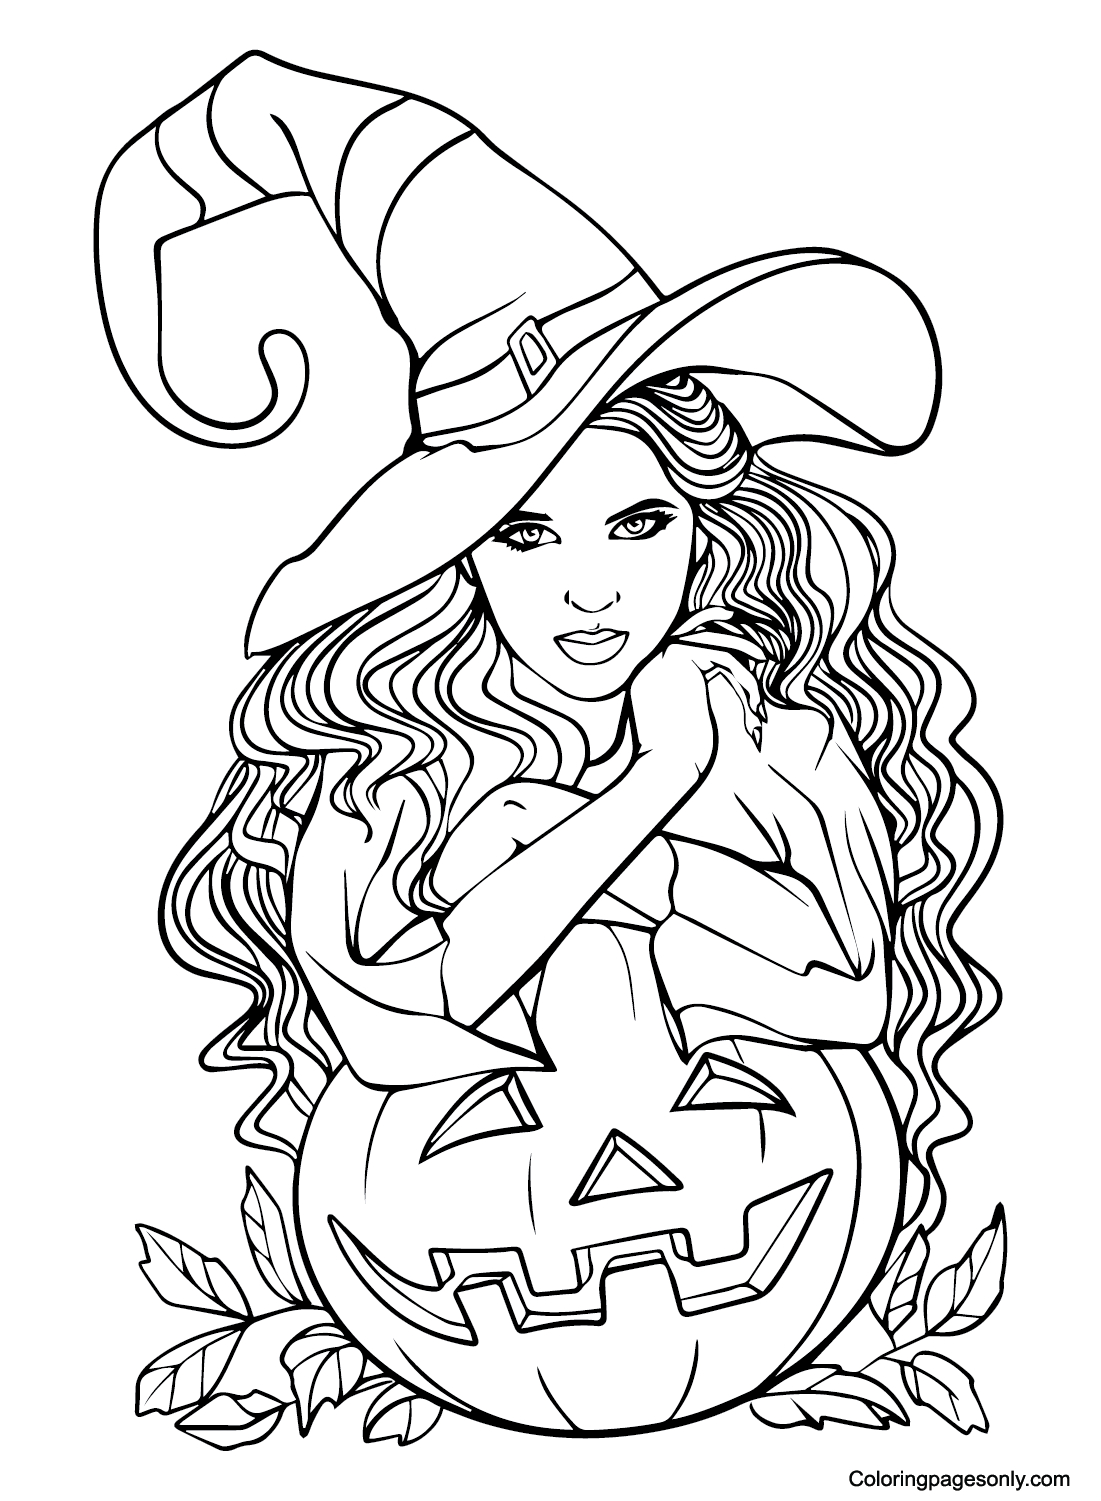 Free Teenage Girl Coloring Pages